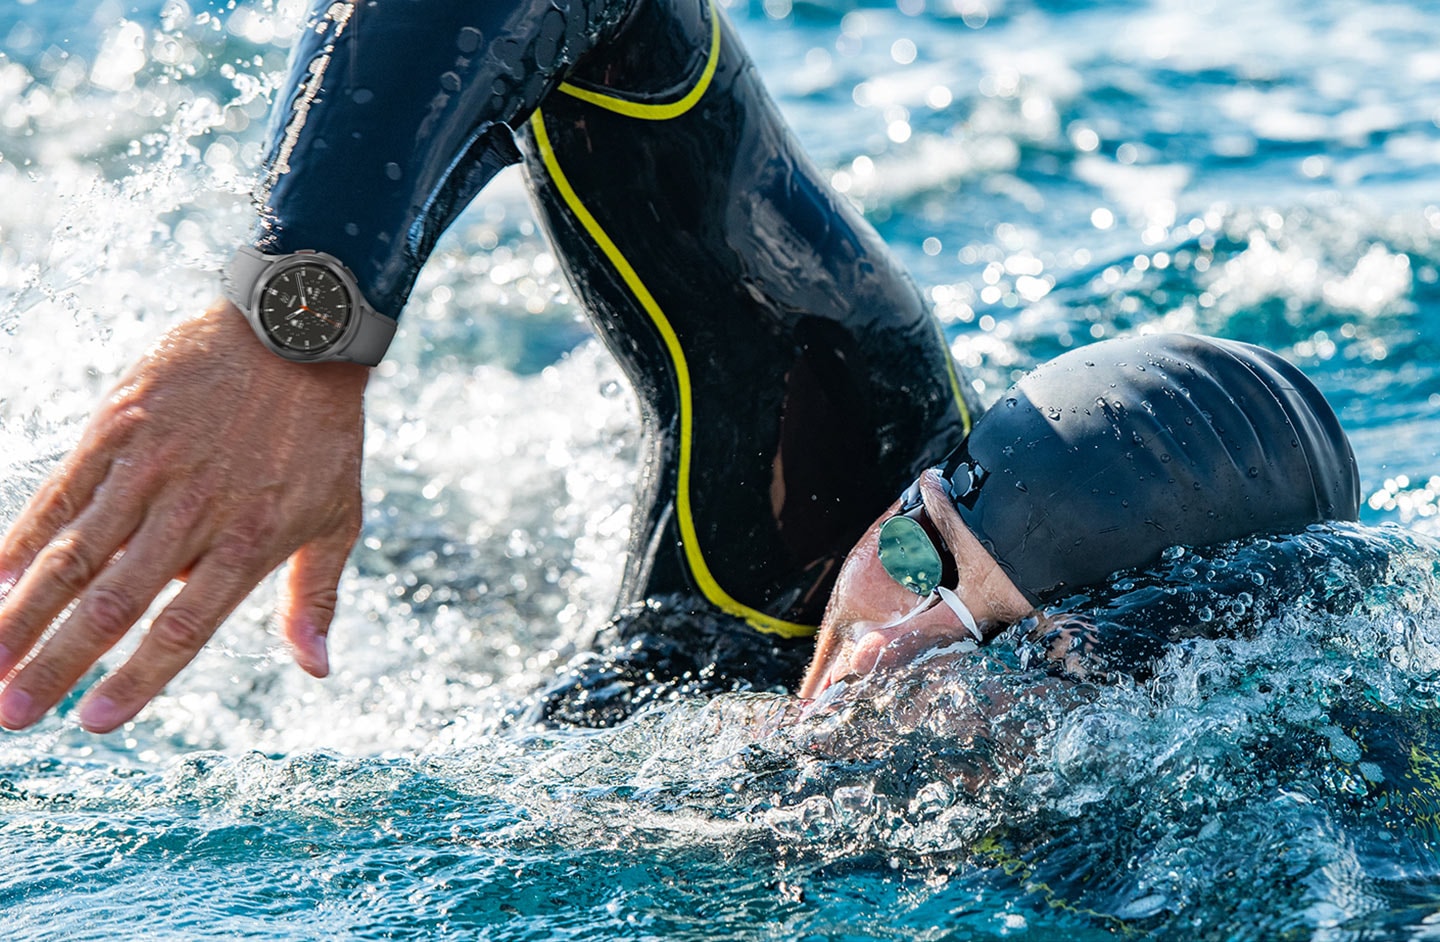 A man is actively swimming and as his right arm is lifted above the water's surface during a swimming stroke, a silver Galaxy Watch4 device attached with a Gray color Ridge band can be seen on his right hand wrist.